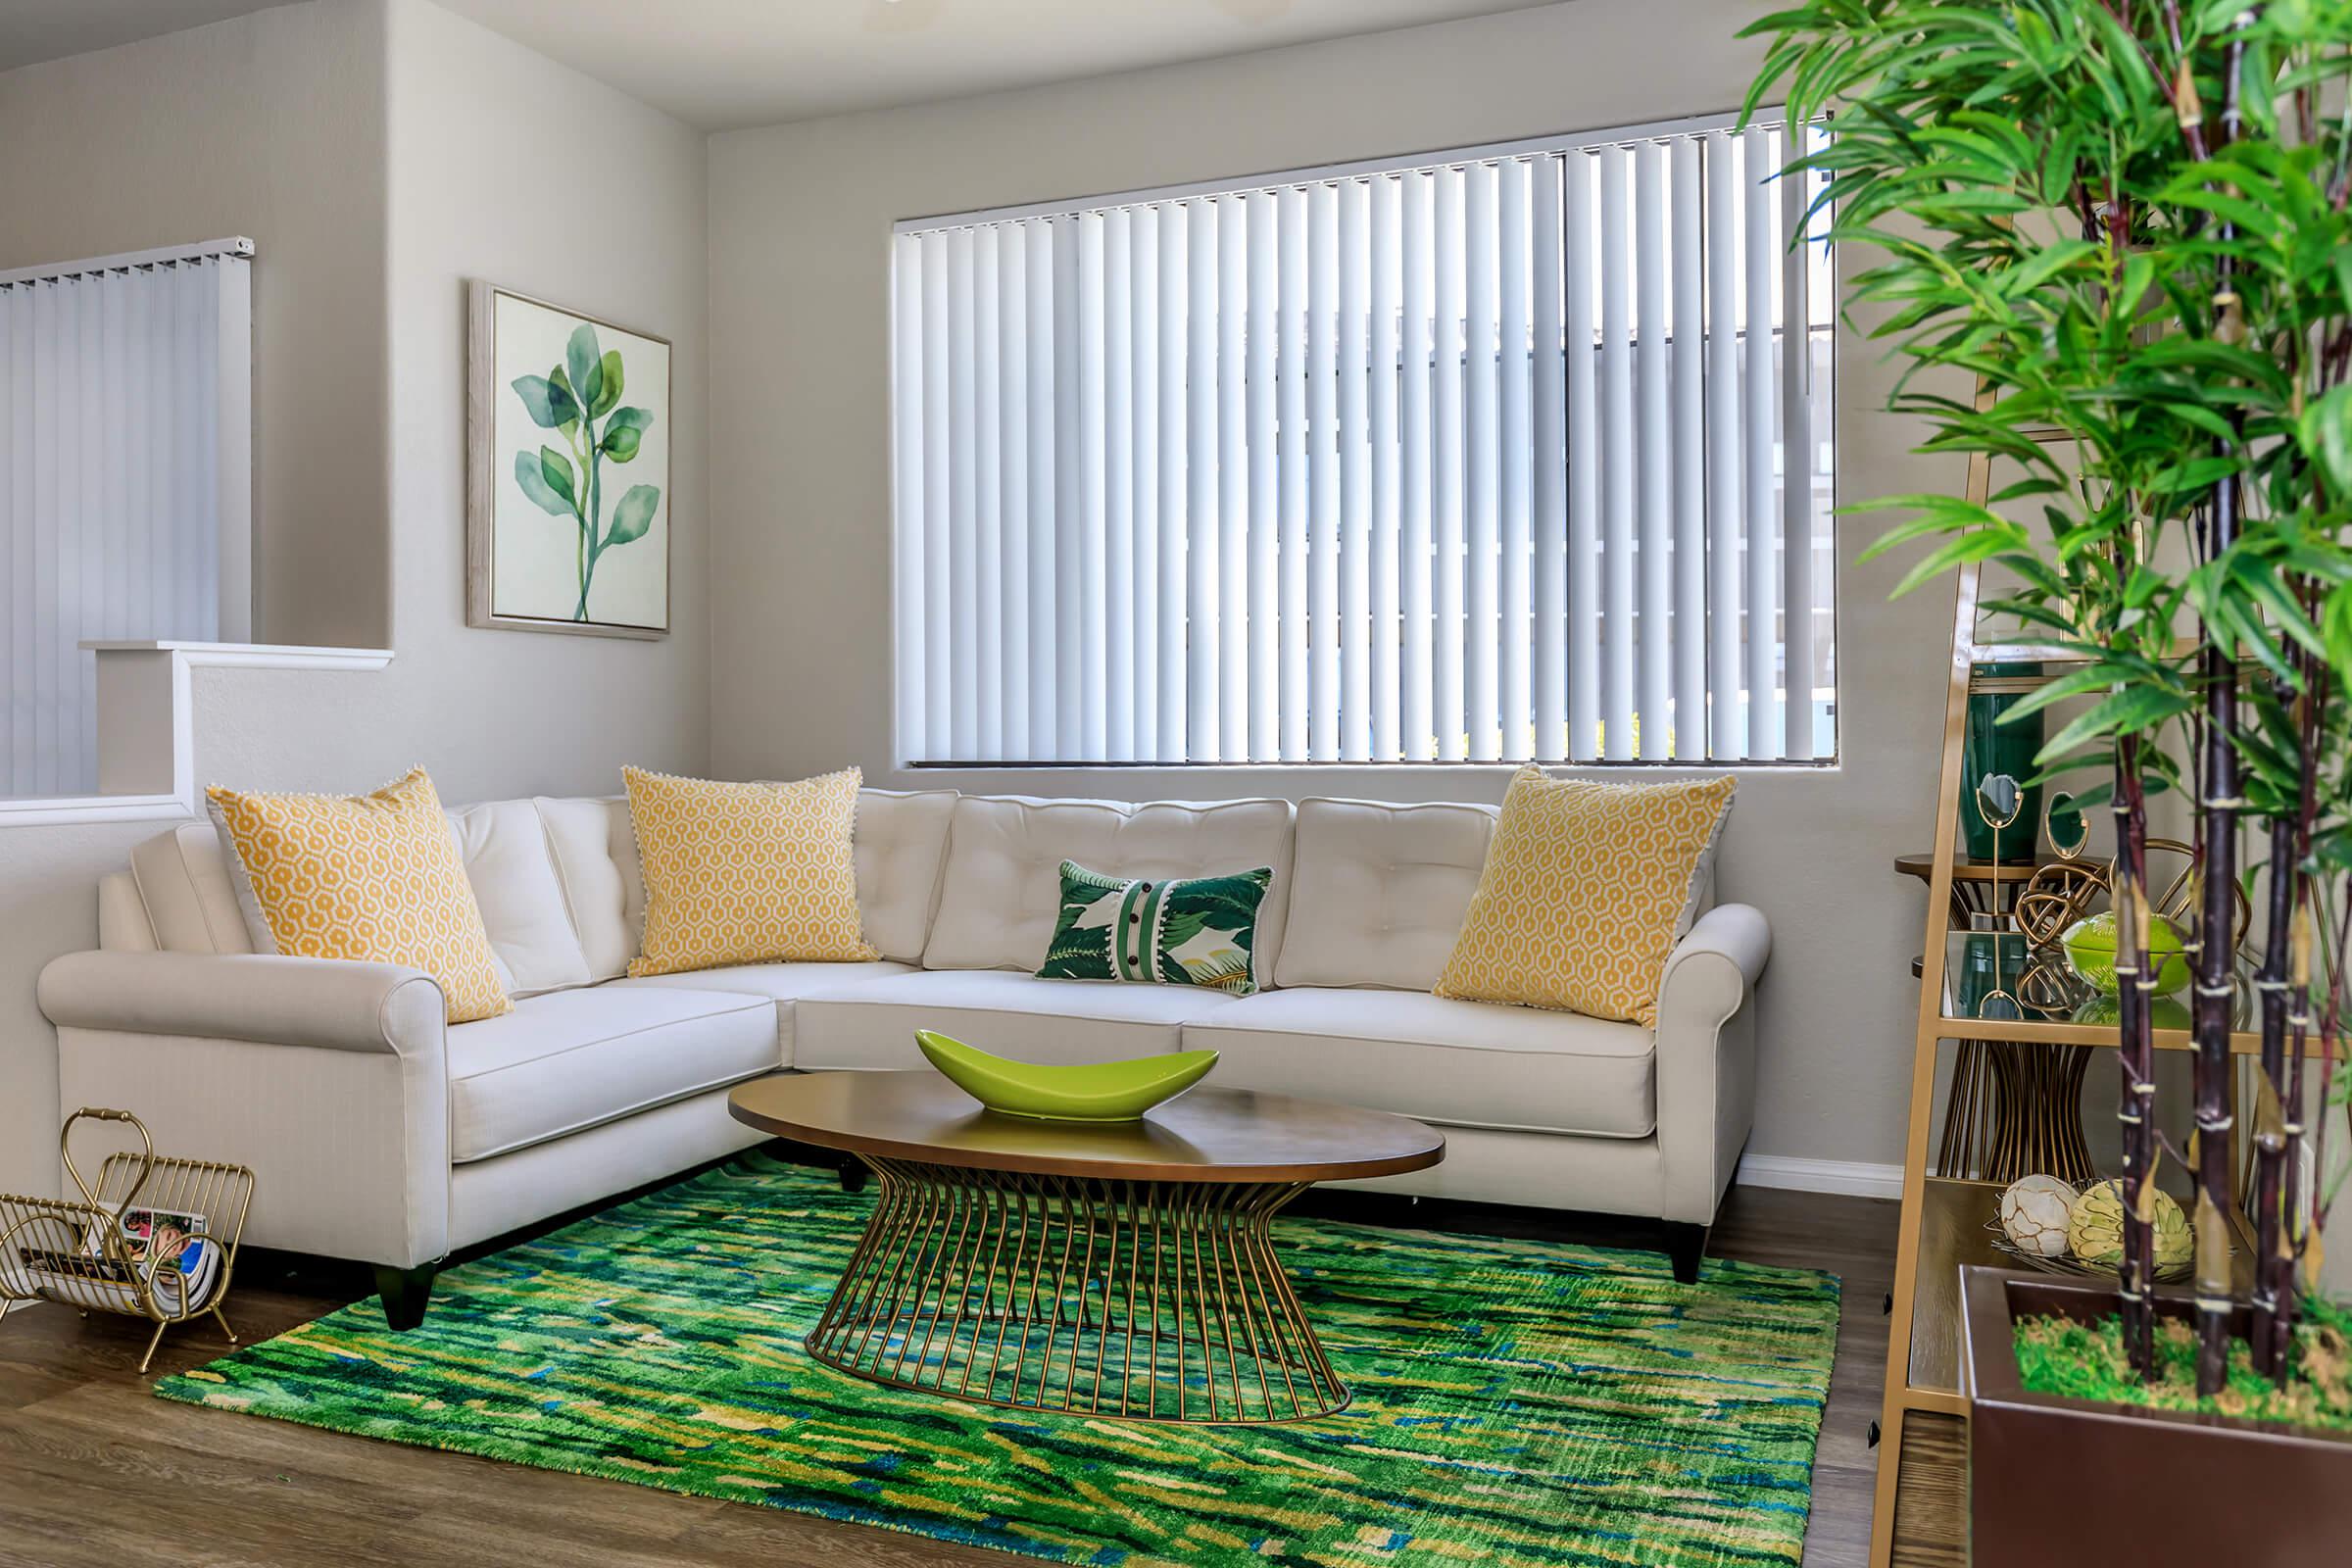 RELAX IN YOUR NEW LIVING ROOM AT THE CANTERA APARTMENTS BY PICERNE